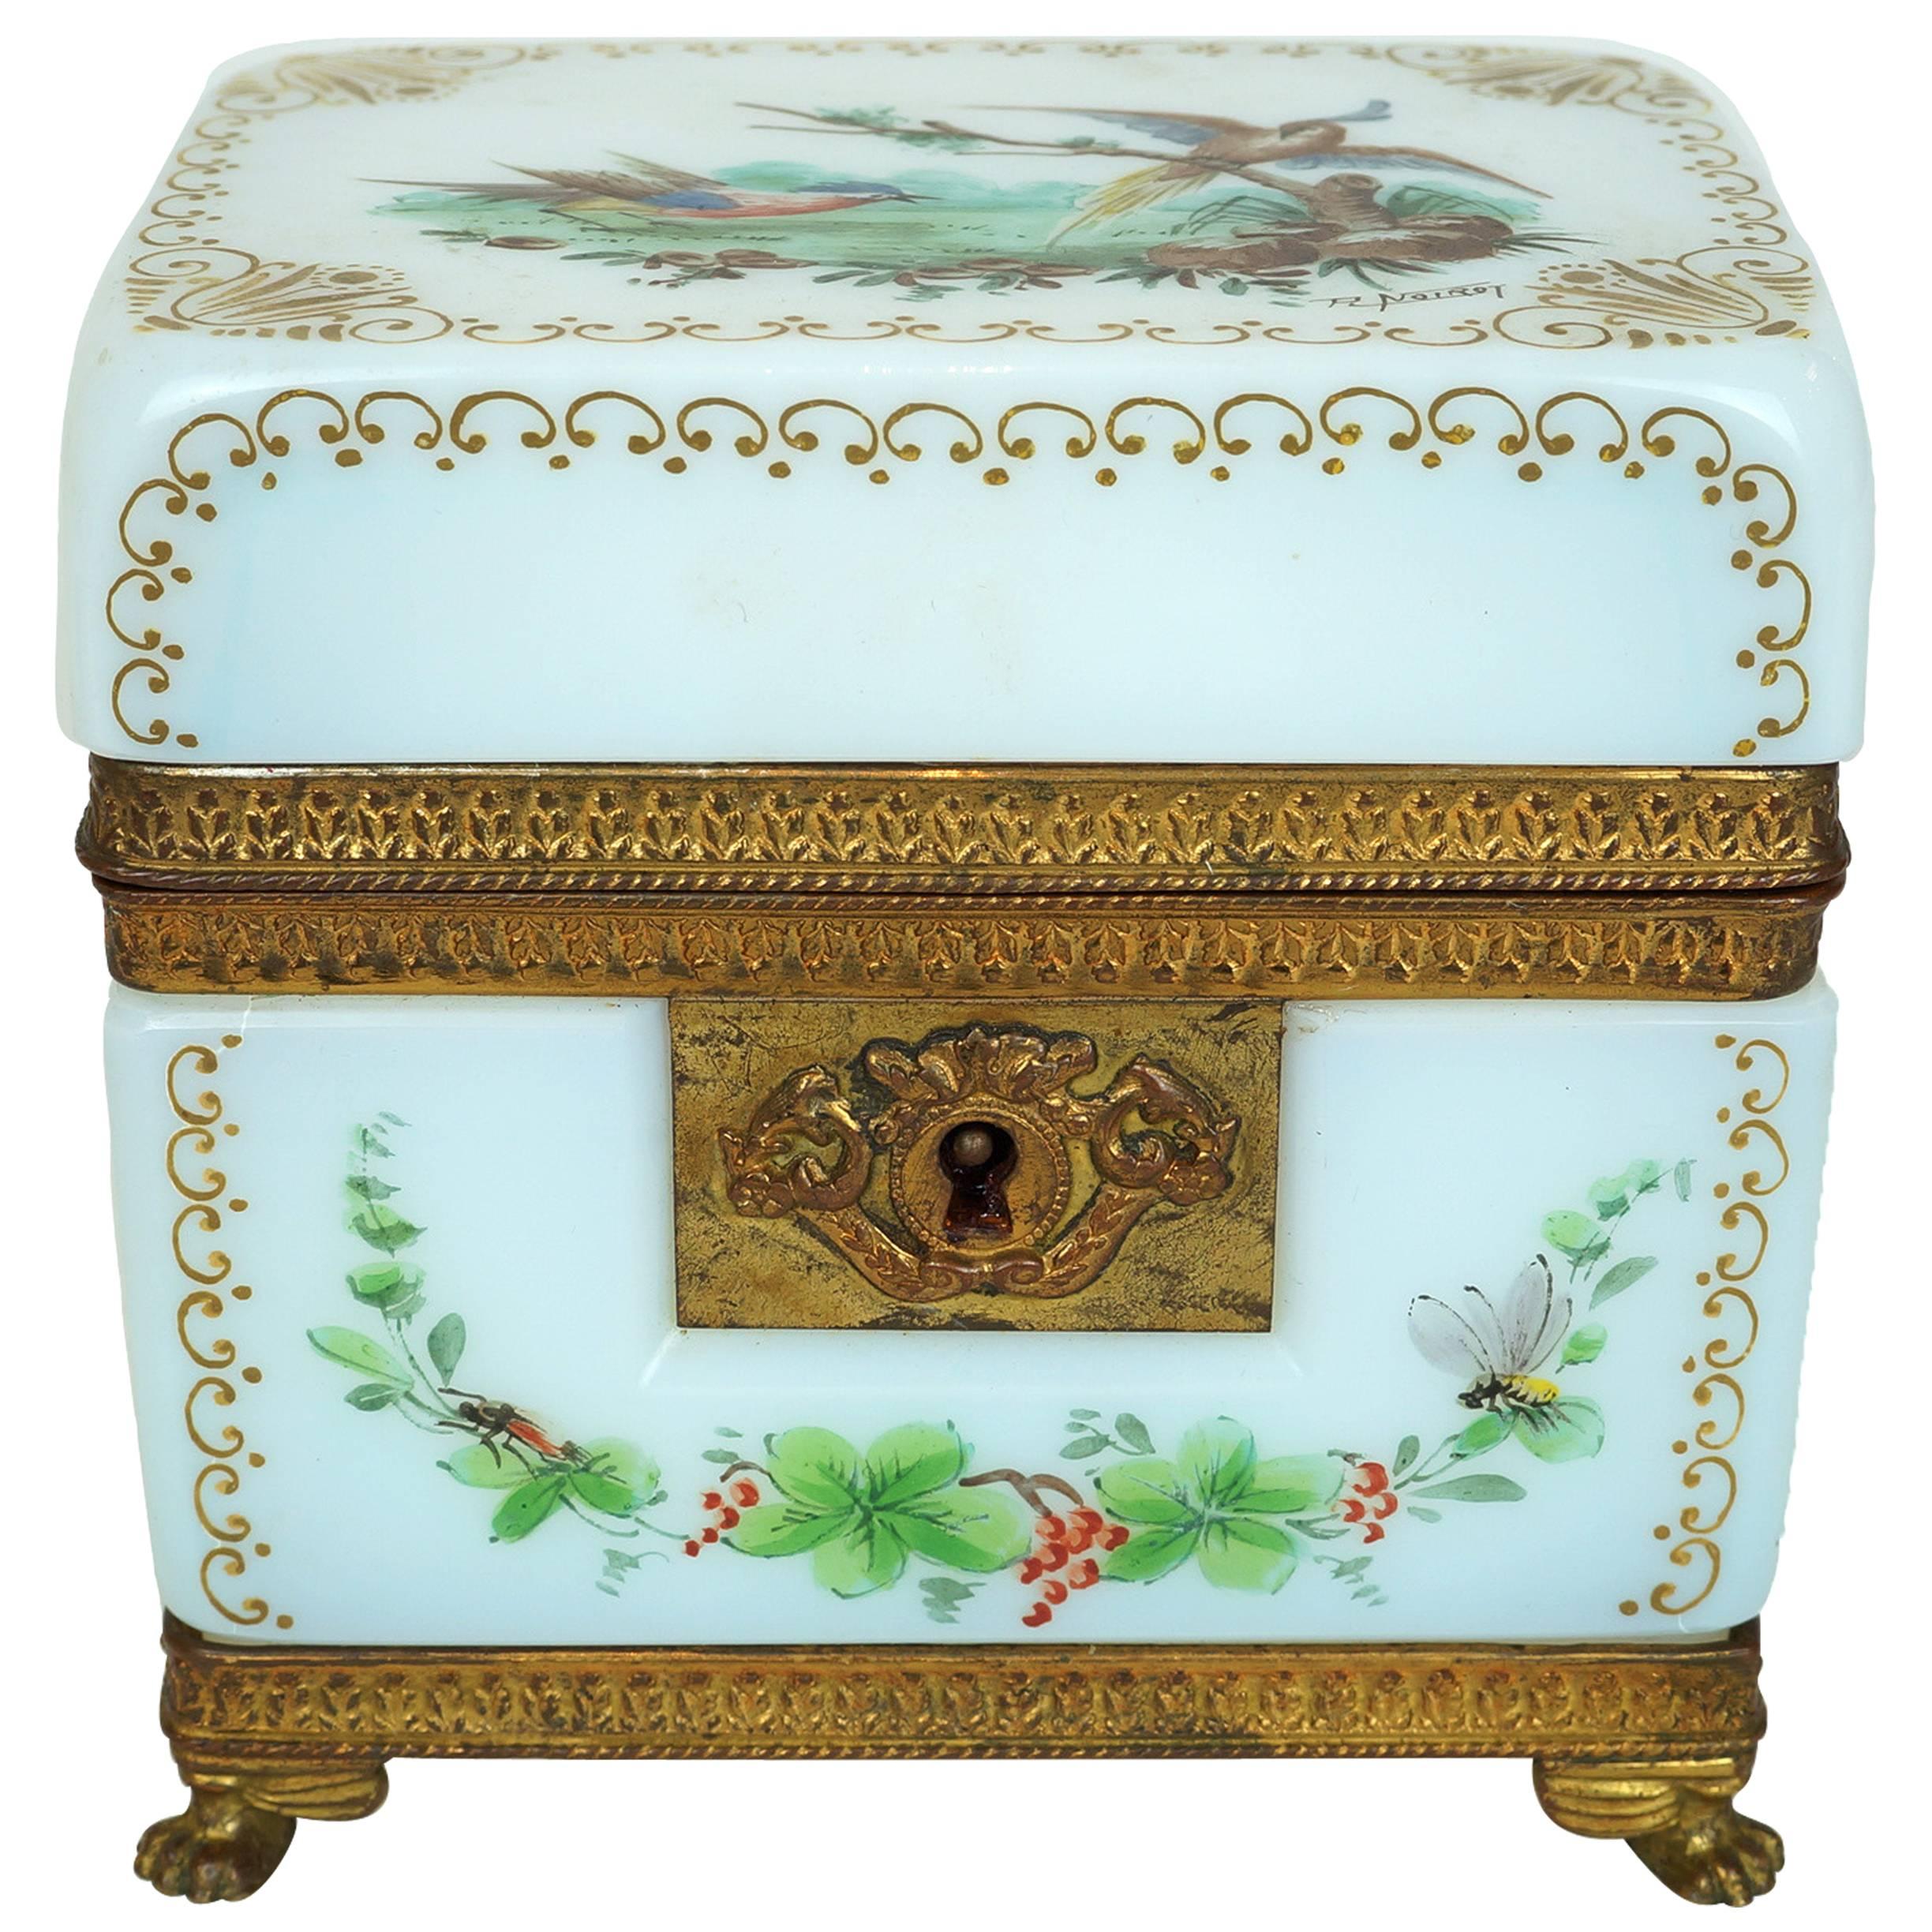 French White Opaline Jewelry Box with Painted Floral and Bird Decorations